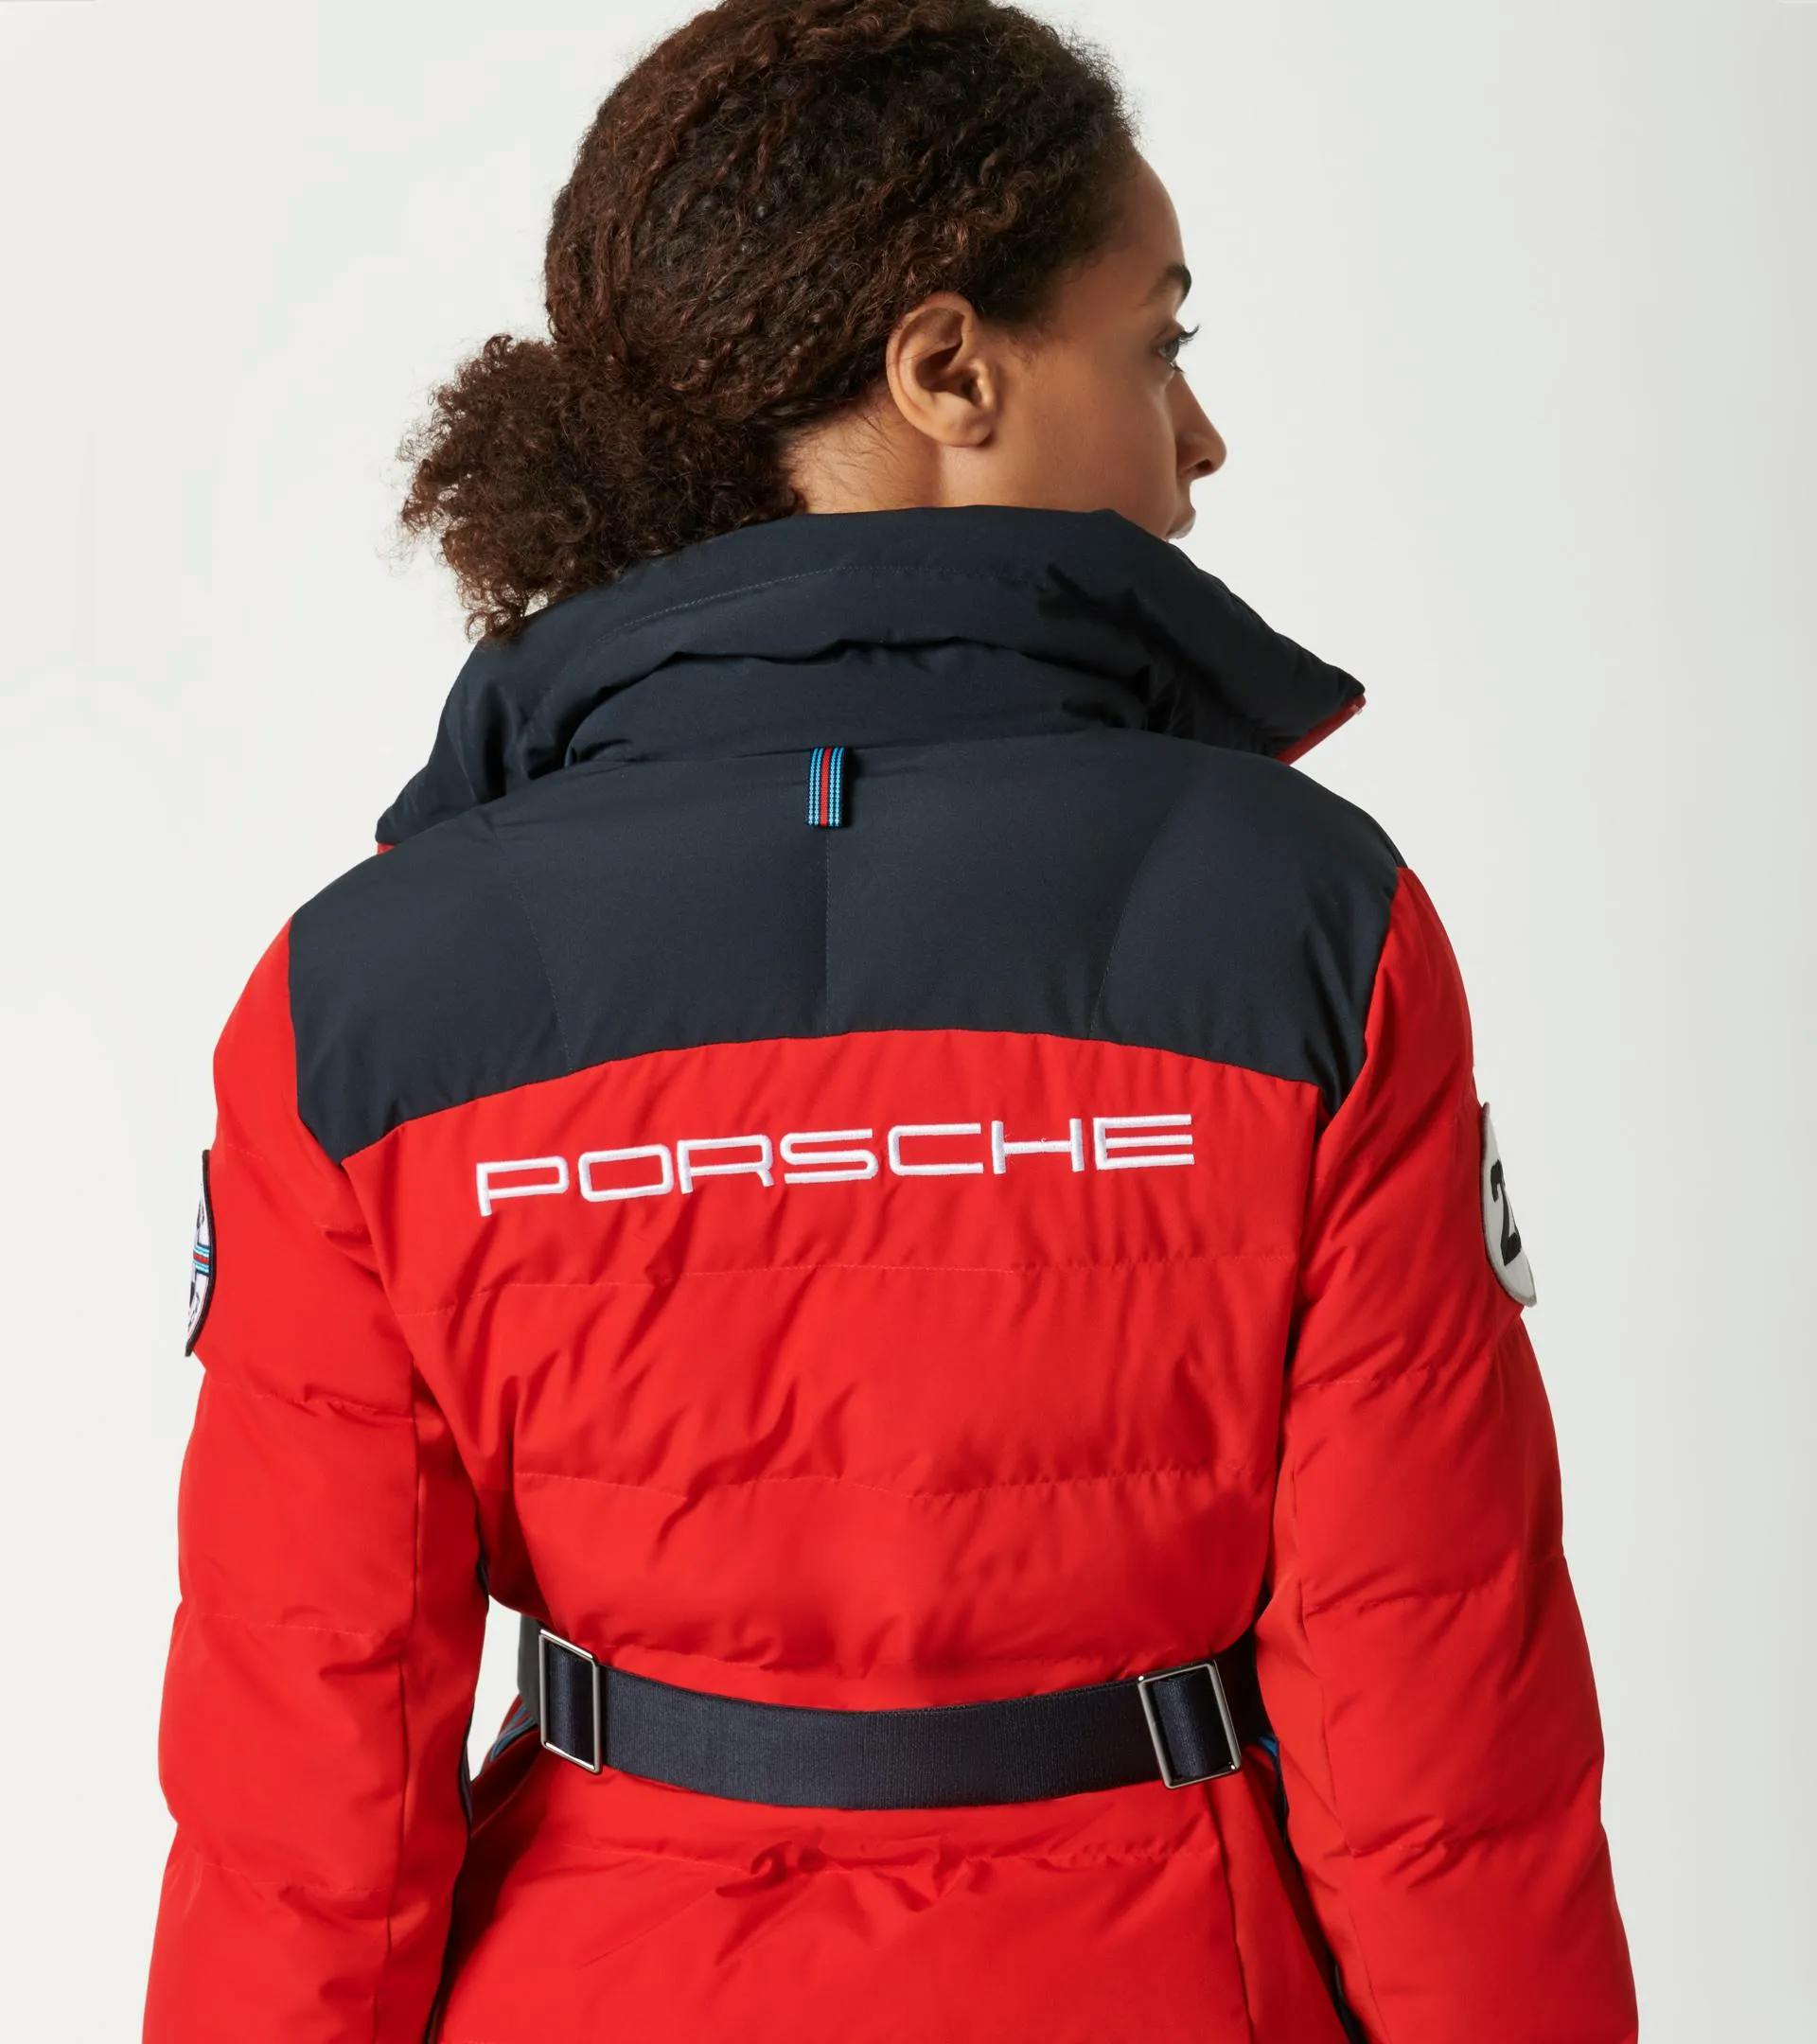 Women's quilted jacket – MARTINI RACING® 5